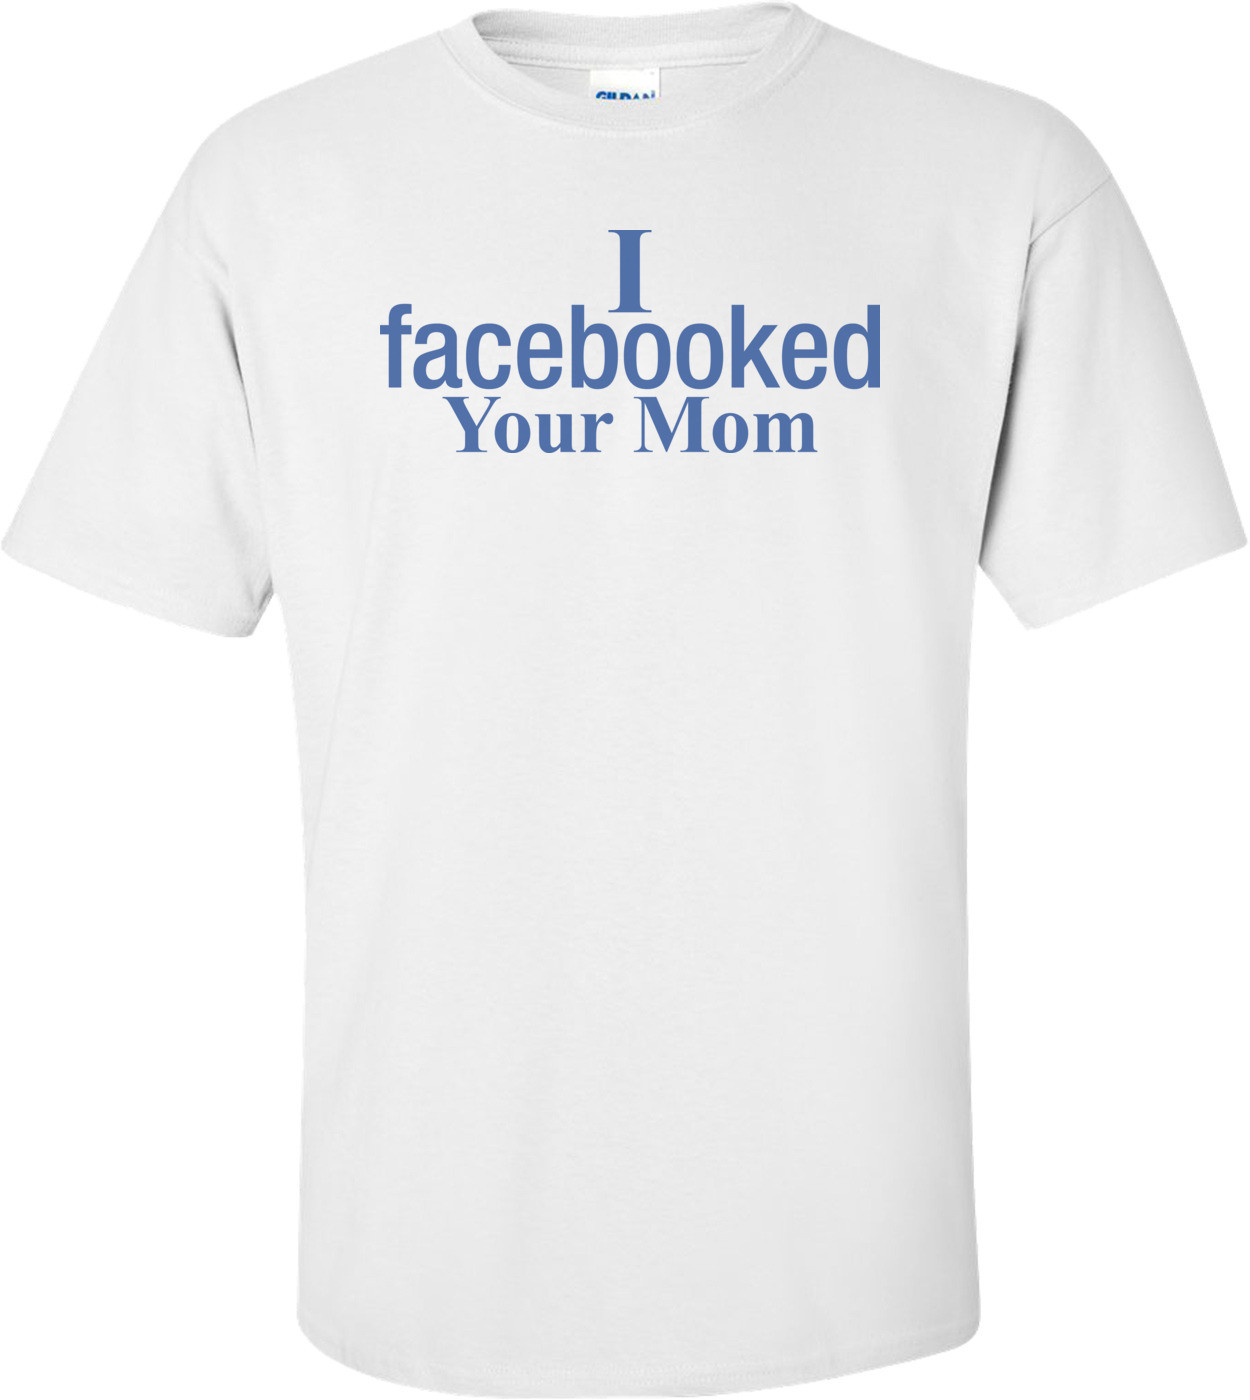 I Facebooked Your Mom